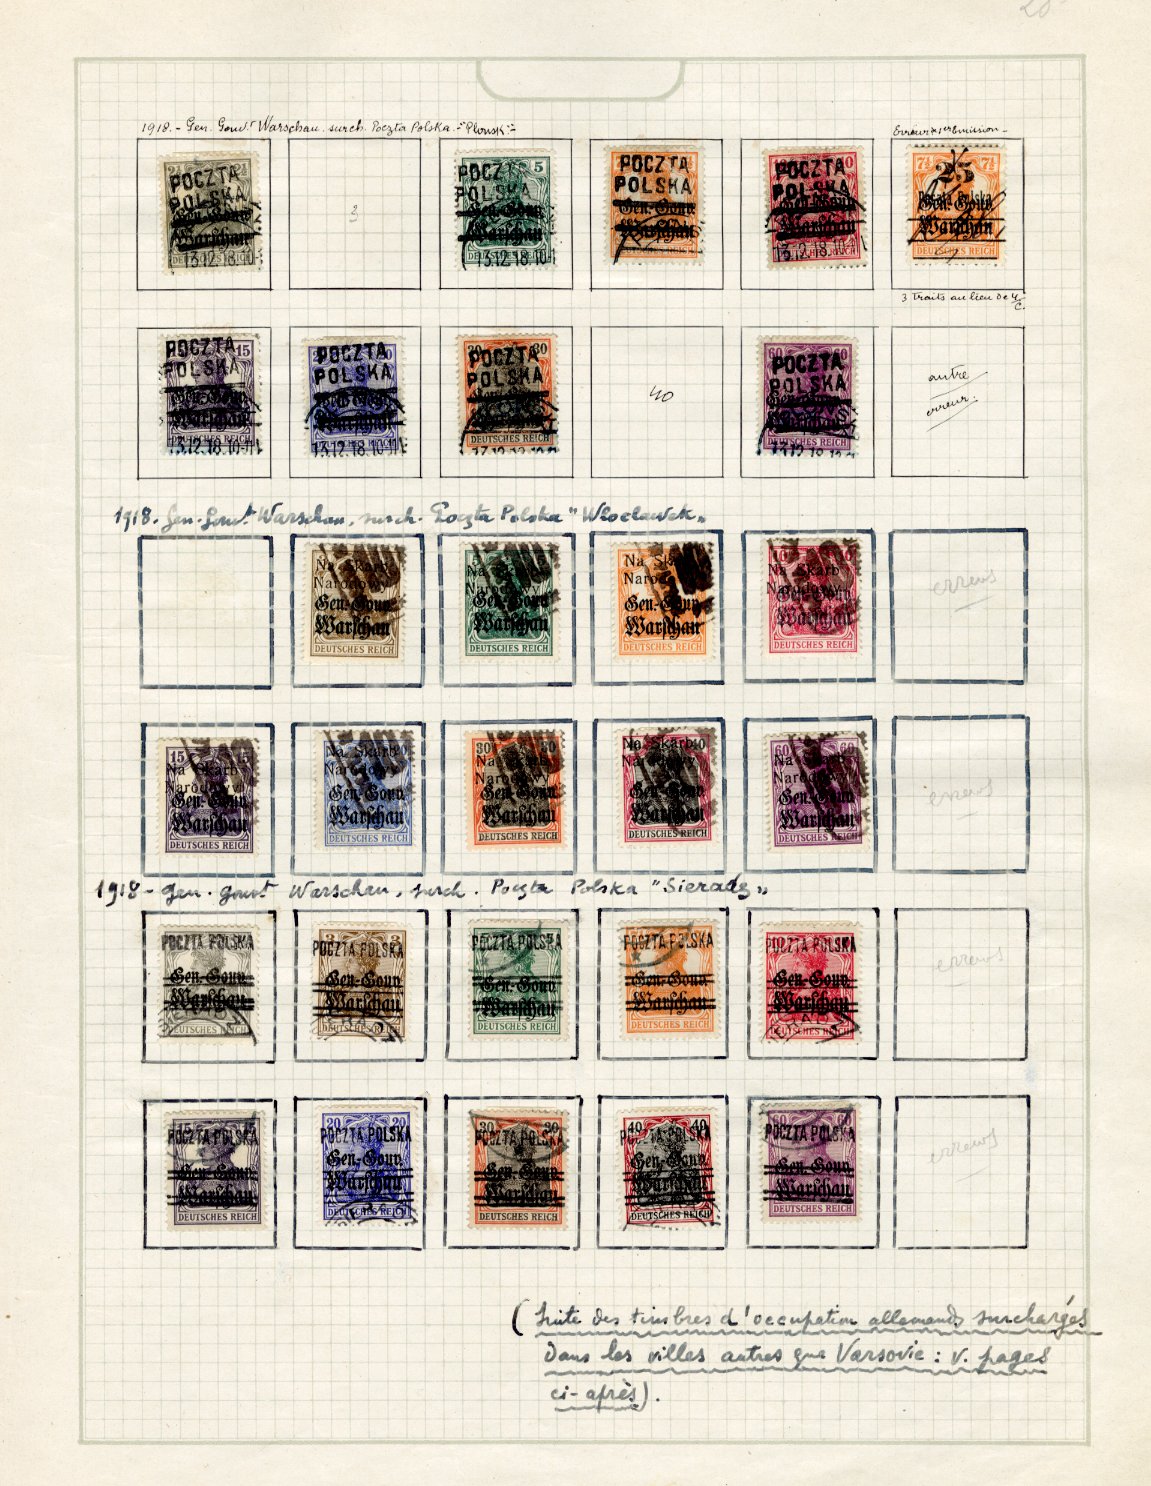 Lot 1509 - LARGE LOTS AND COLLECTIONS YEMEN  -  Cherrystone Auctions U.S. & Worldwide Stamps & Postal History